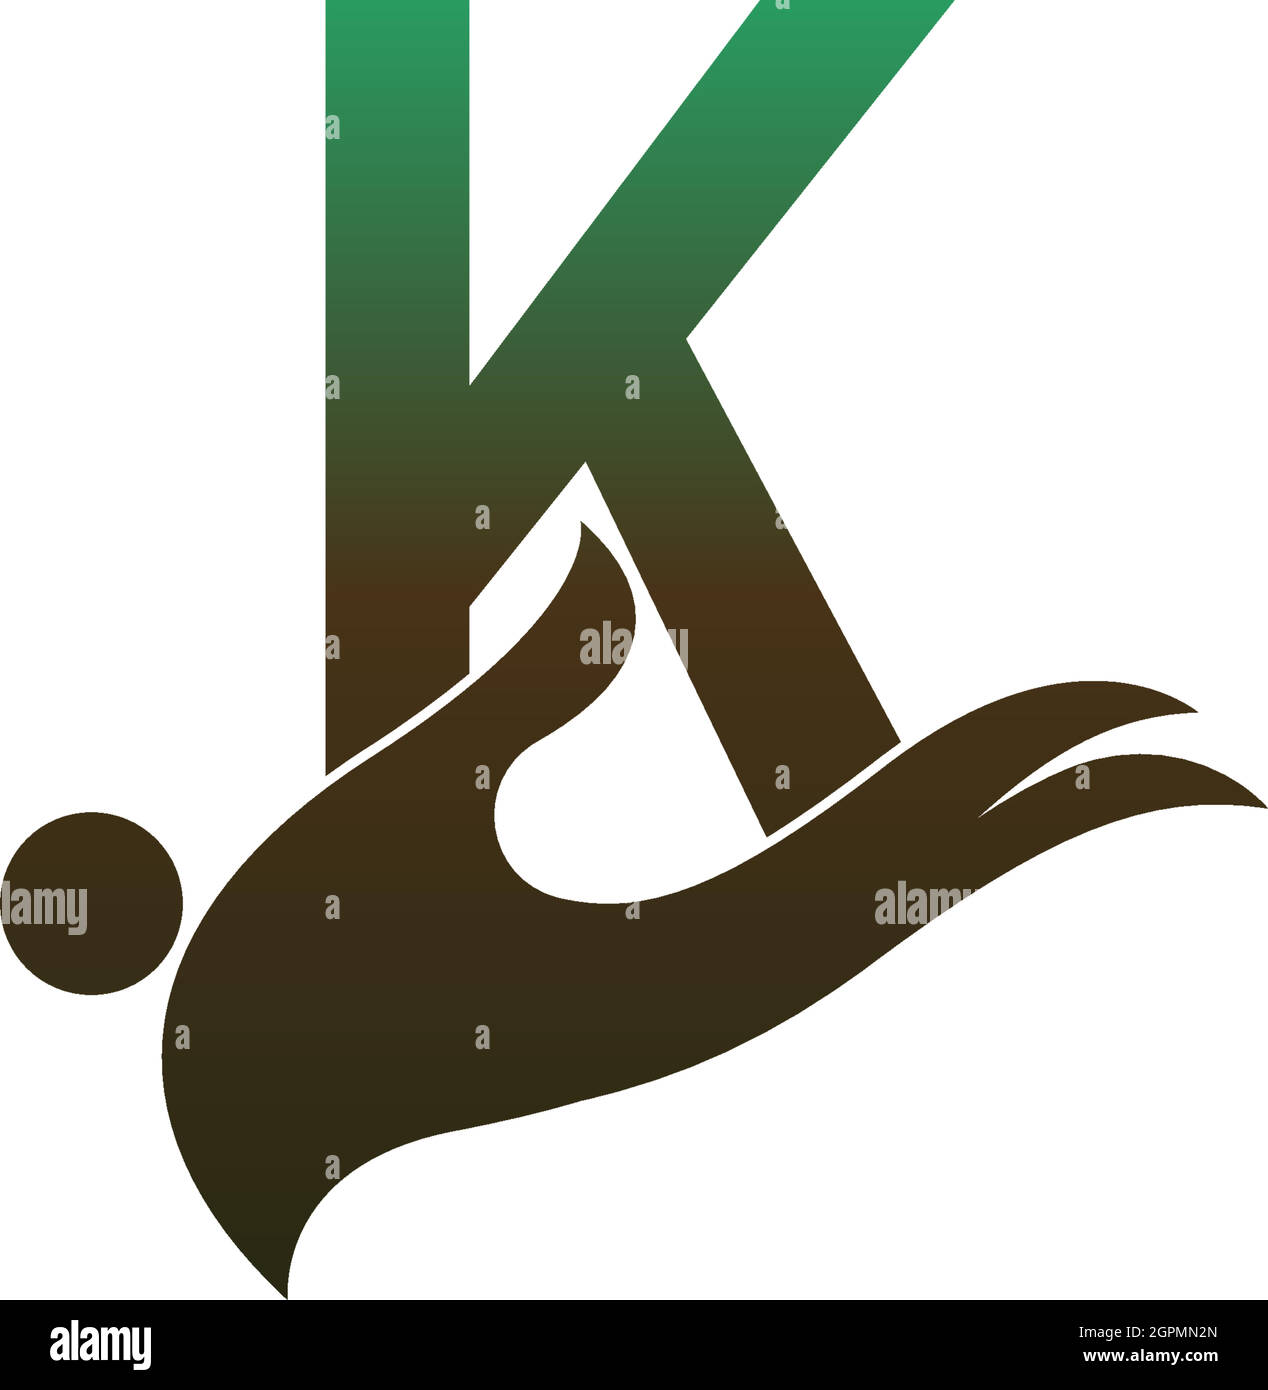 Letter K logo icon with people hand design symbol template Stock Vector